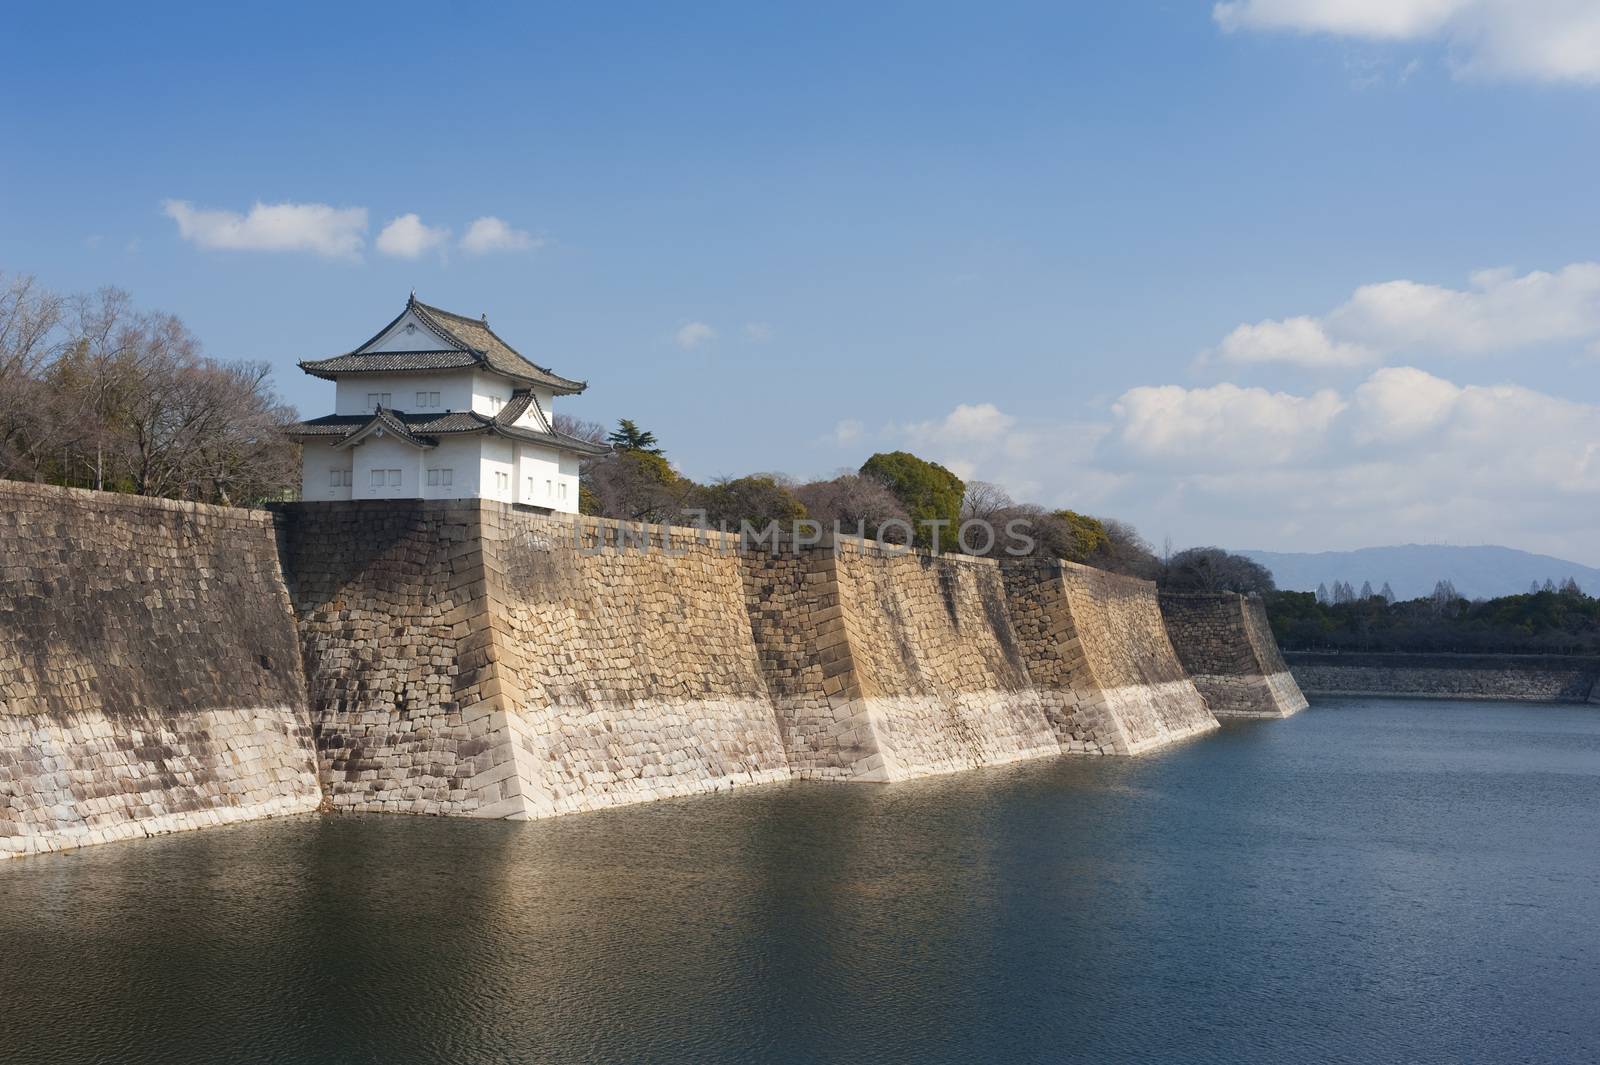 Exterior walls of the Osaka-jo castle, Japan with a small pagoda overlooking the calm water of the surrounding moat, a popular tourist attraction and museum